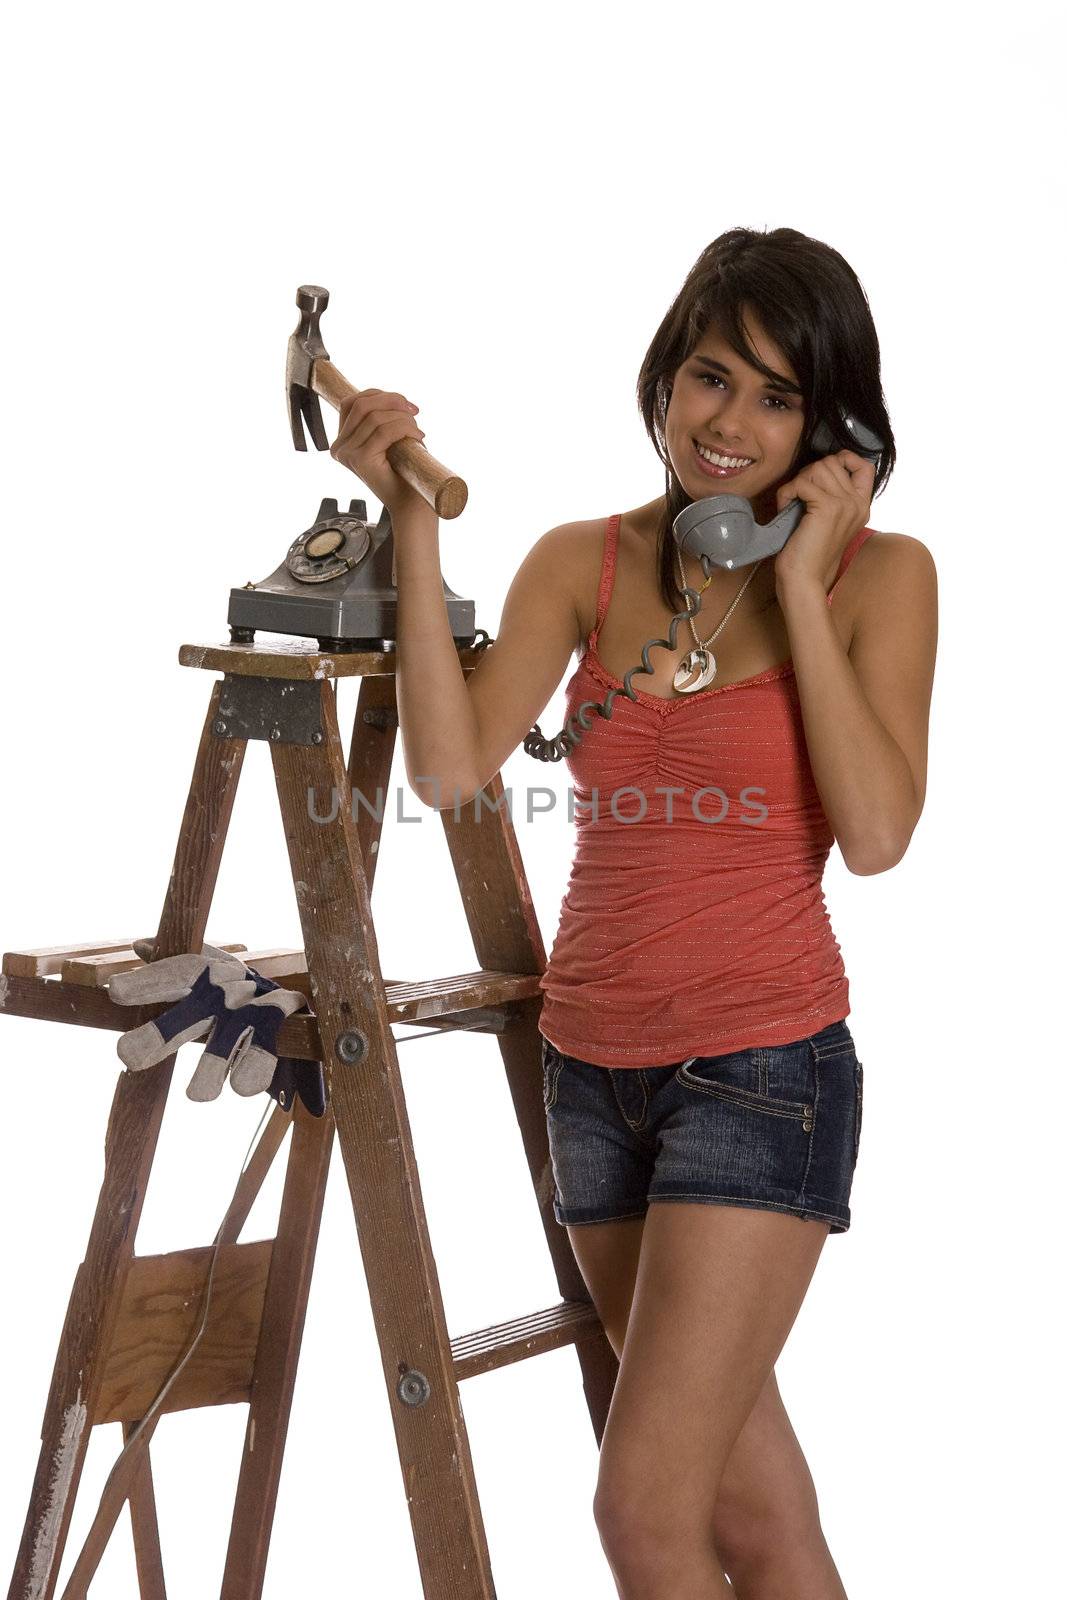 teenage girl standing on ladder talking old rotary phone with a hammer in her hand